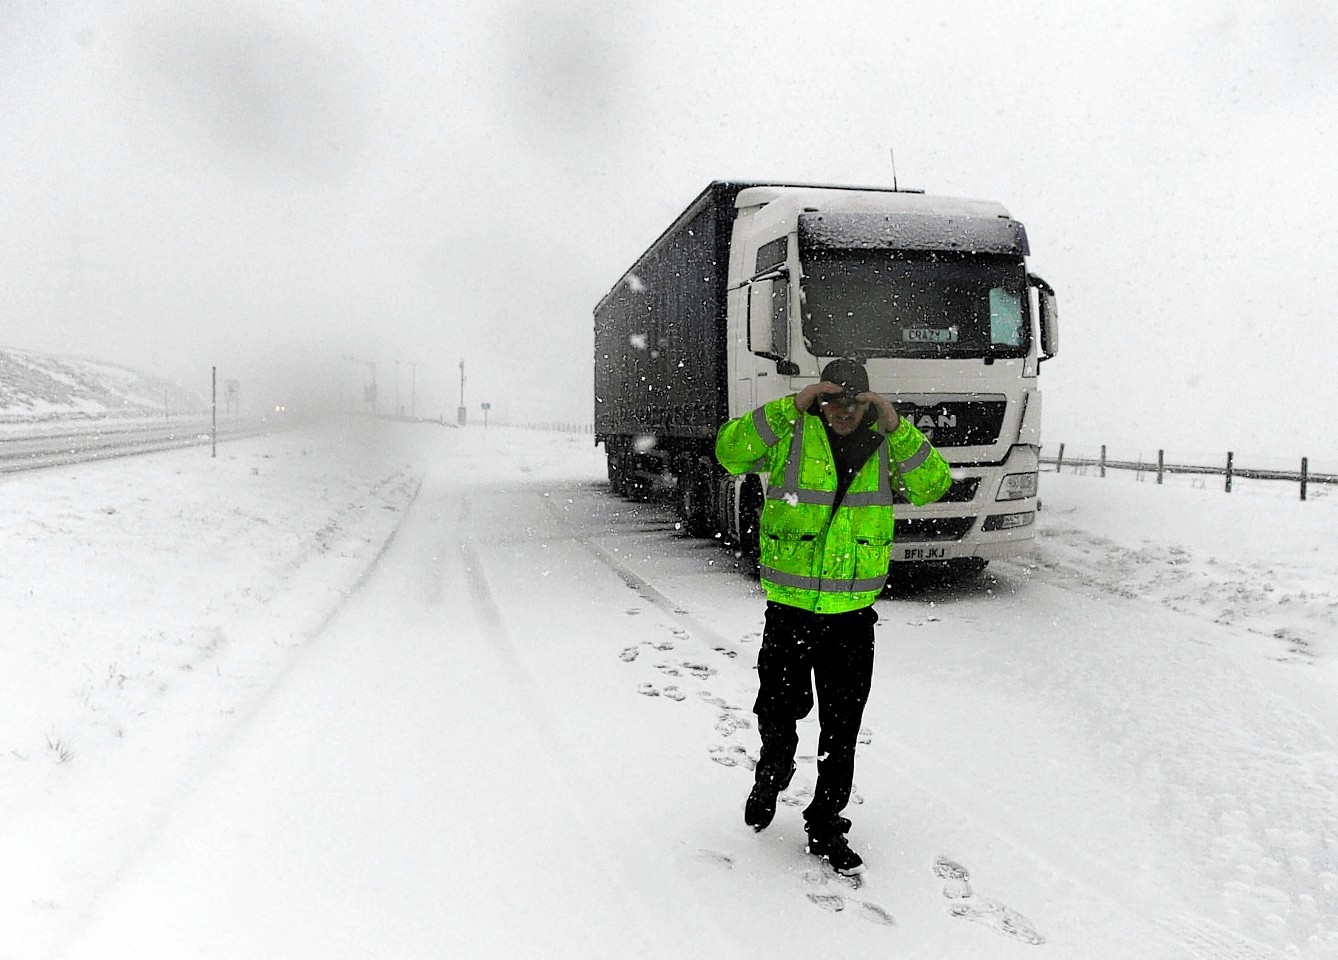 Today's blizzards at the Drumochter Pass on the A9